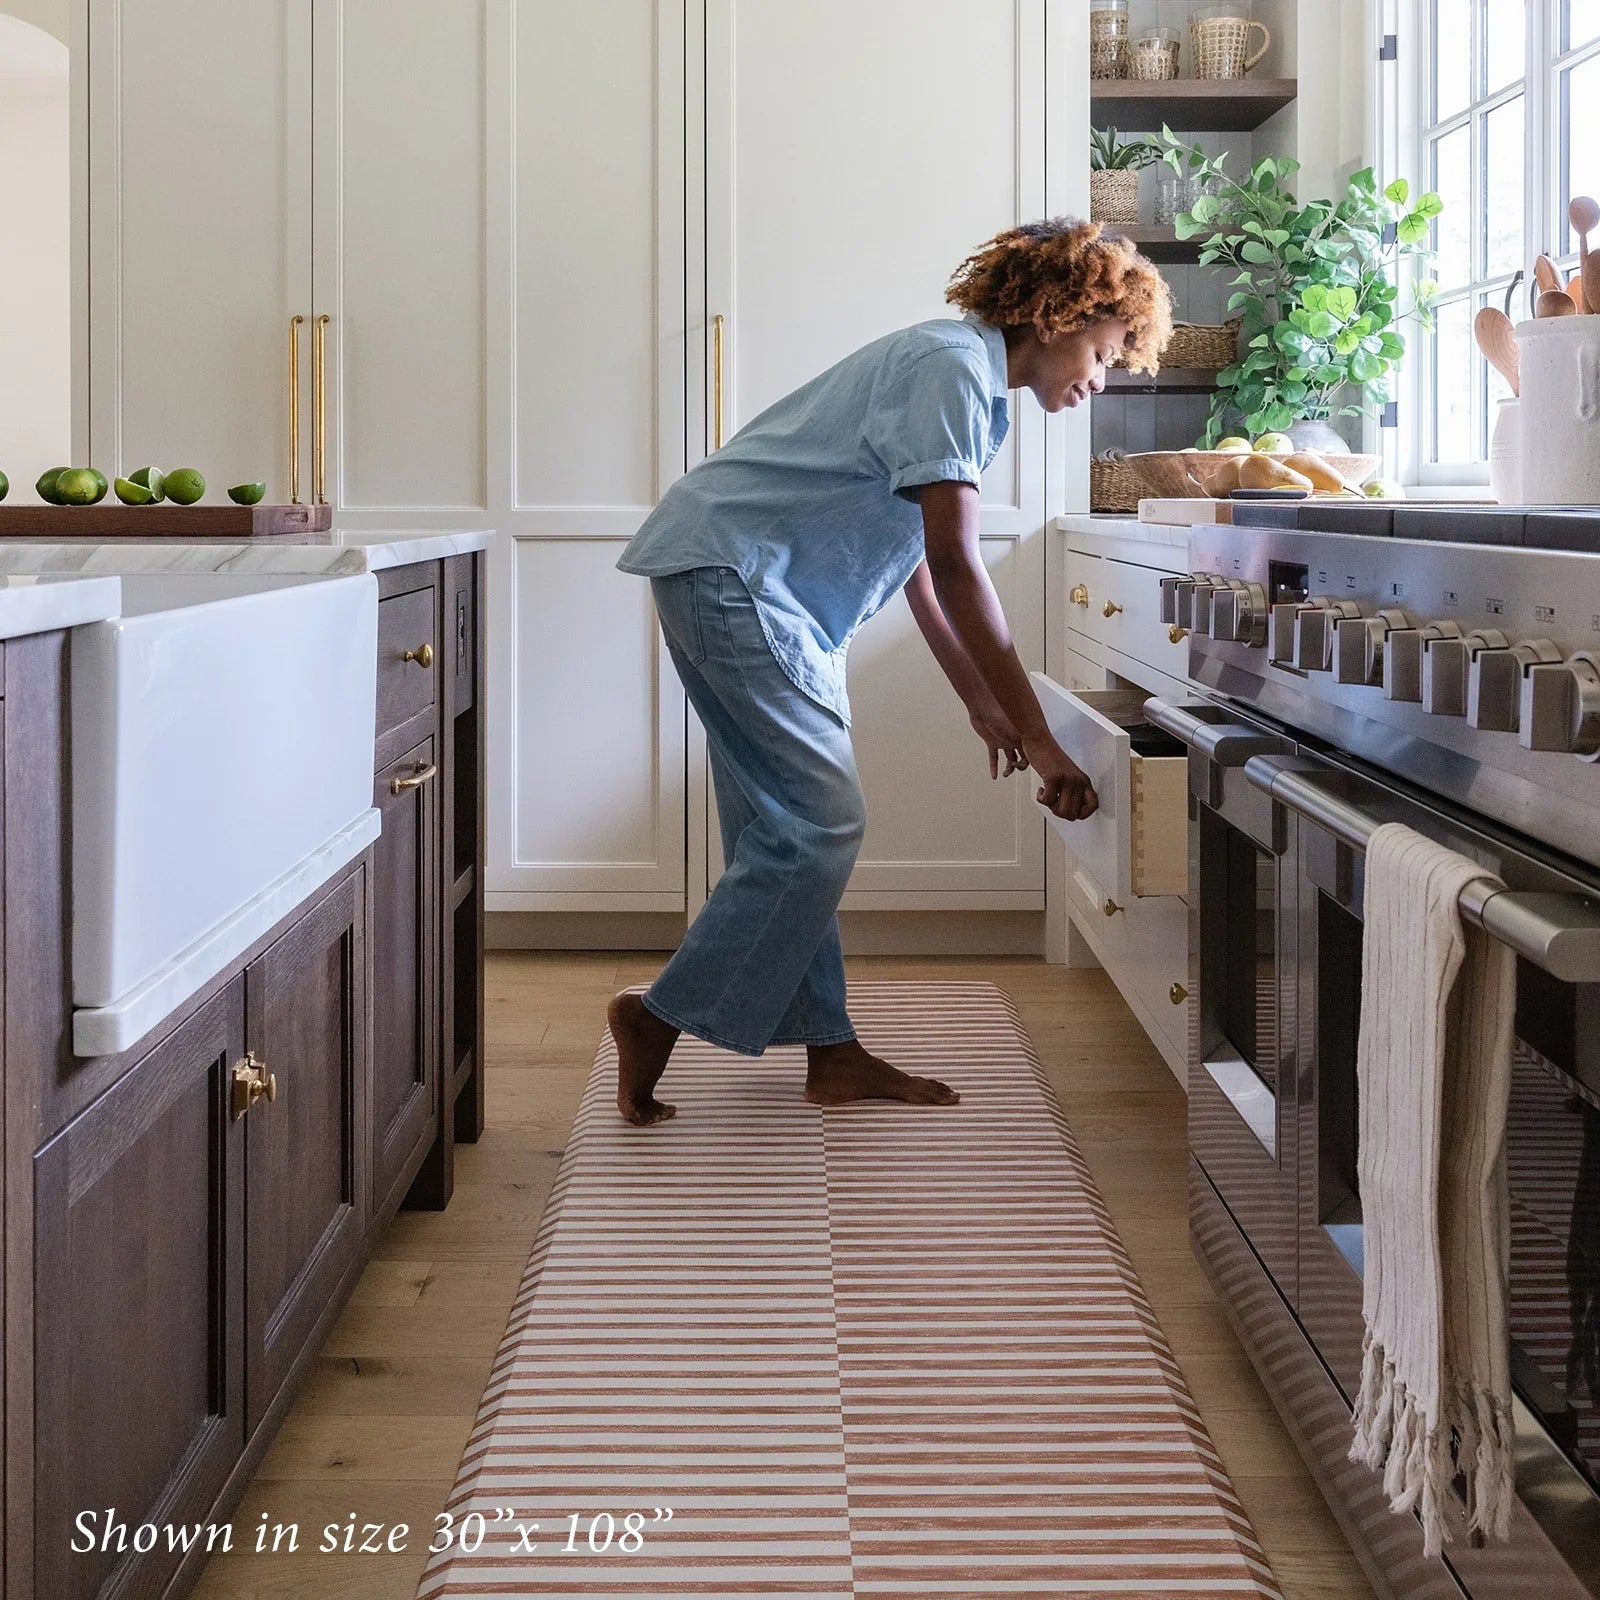 Reese terracotta brown and white inverted stripe standing mat shown in kitchen in size 30x108 with woman opening cabinet drawer